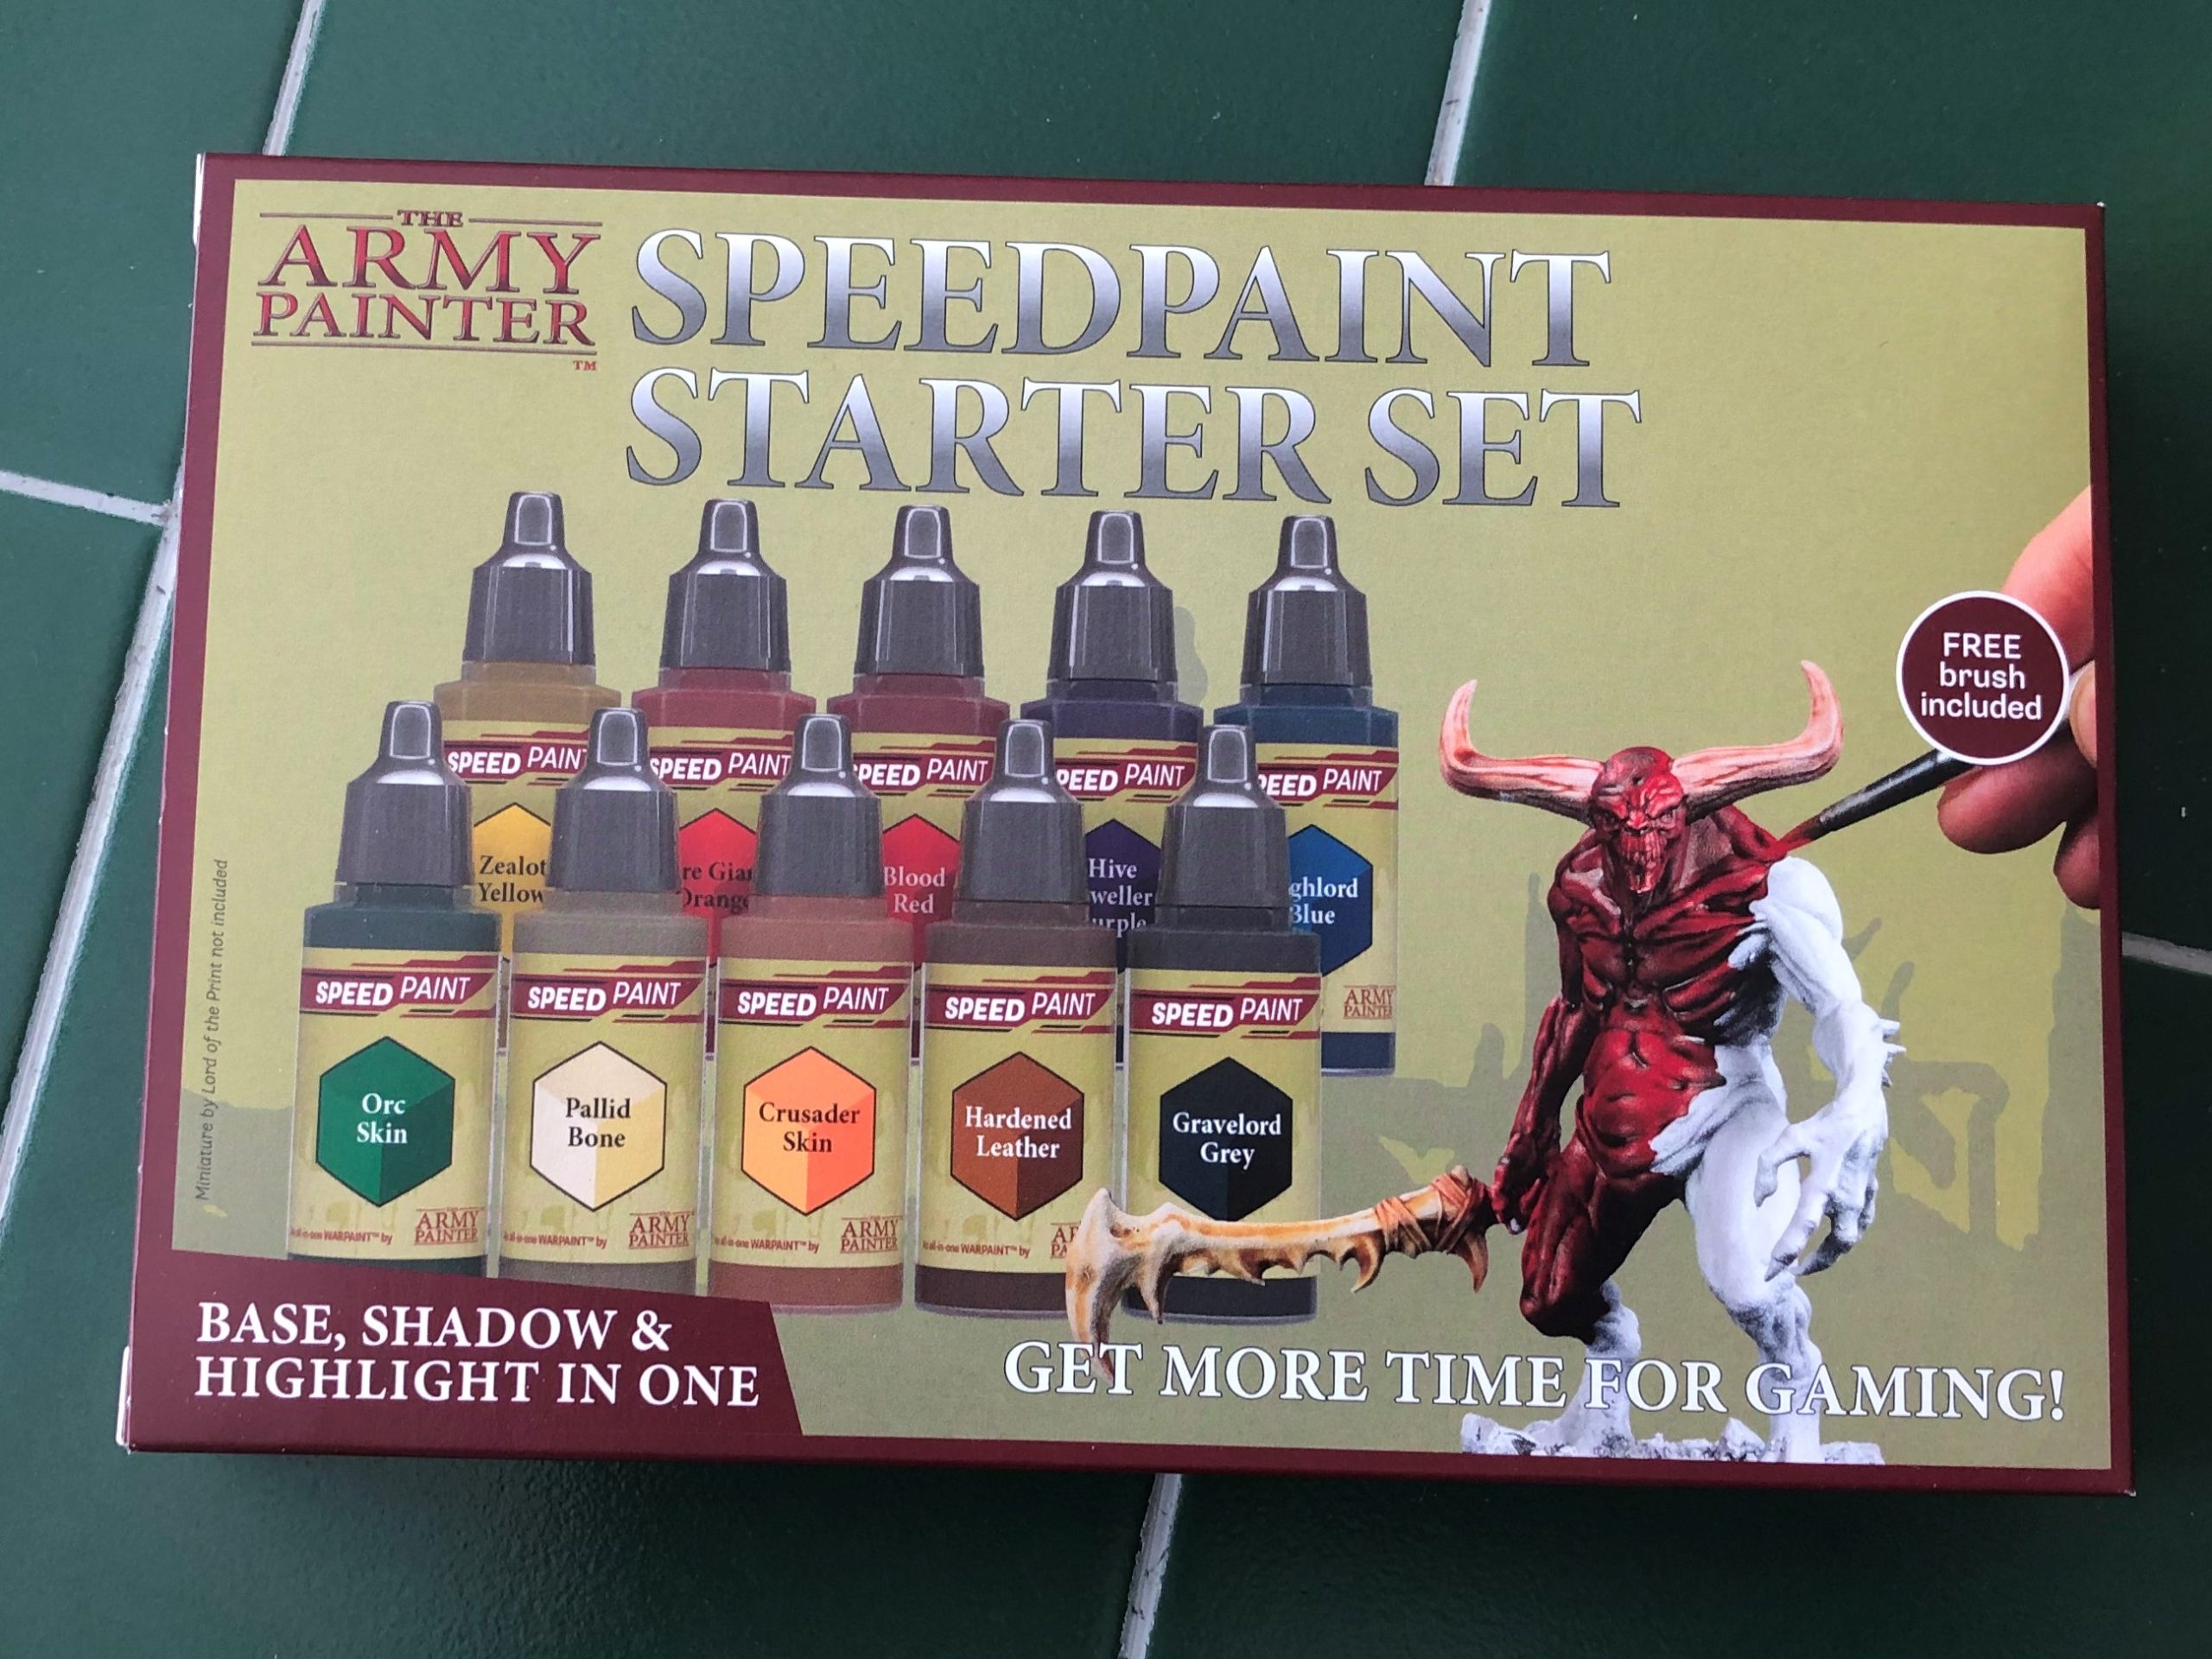 The Army Painter Speedpaint Mega Set: unboxing and test